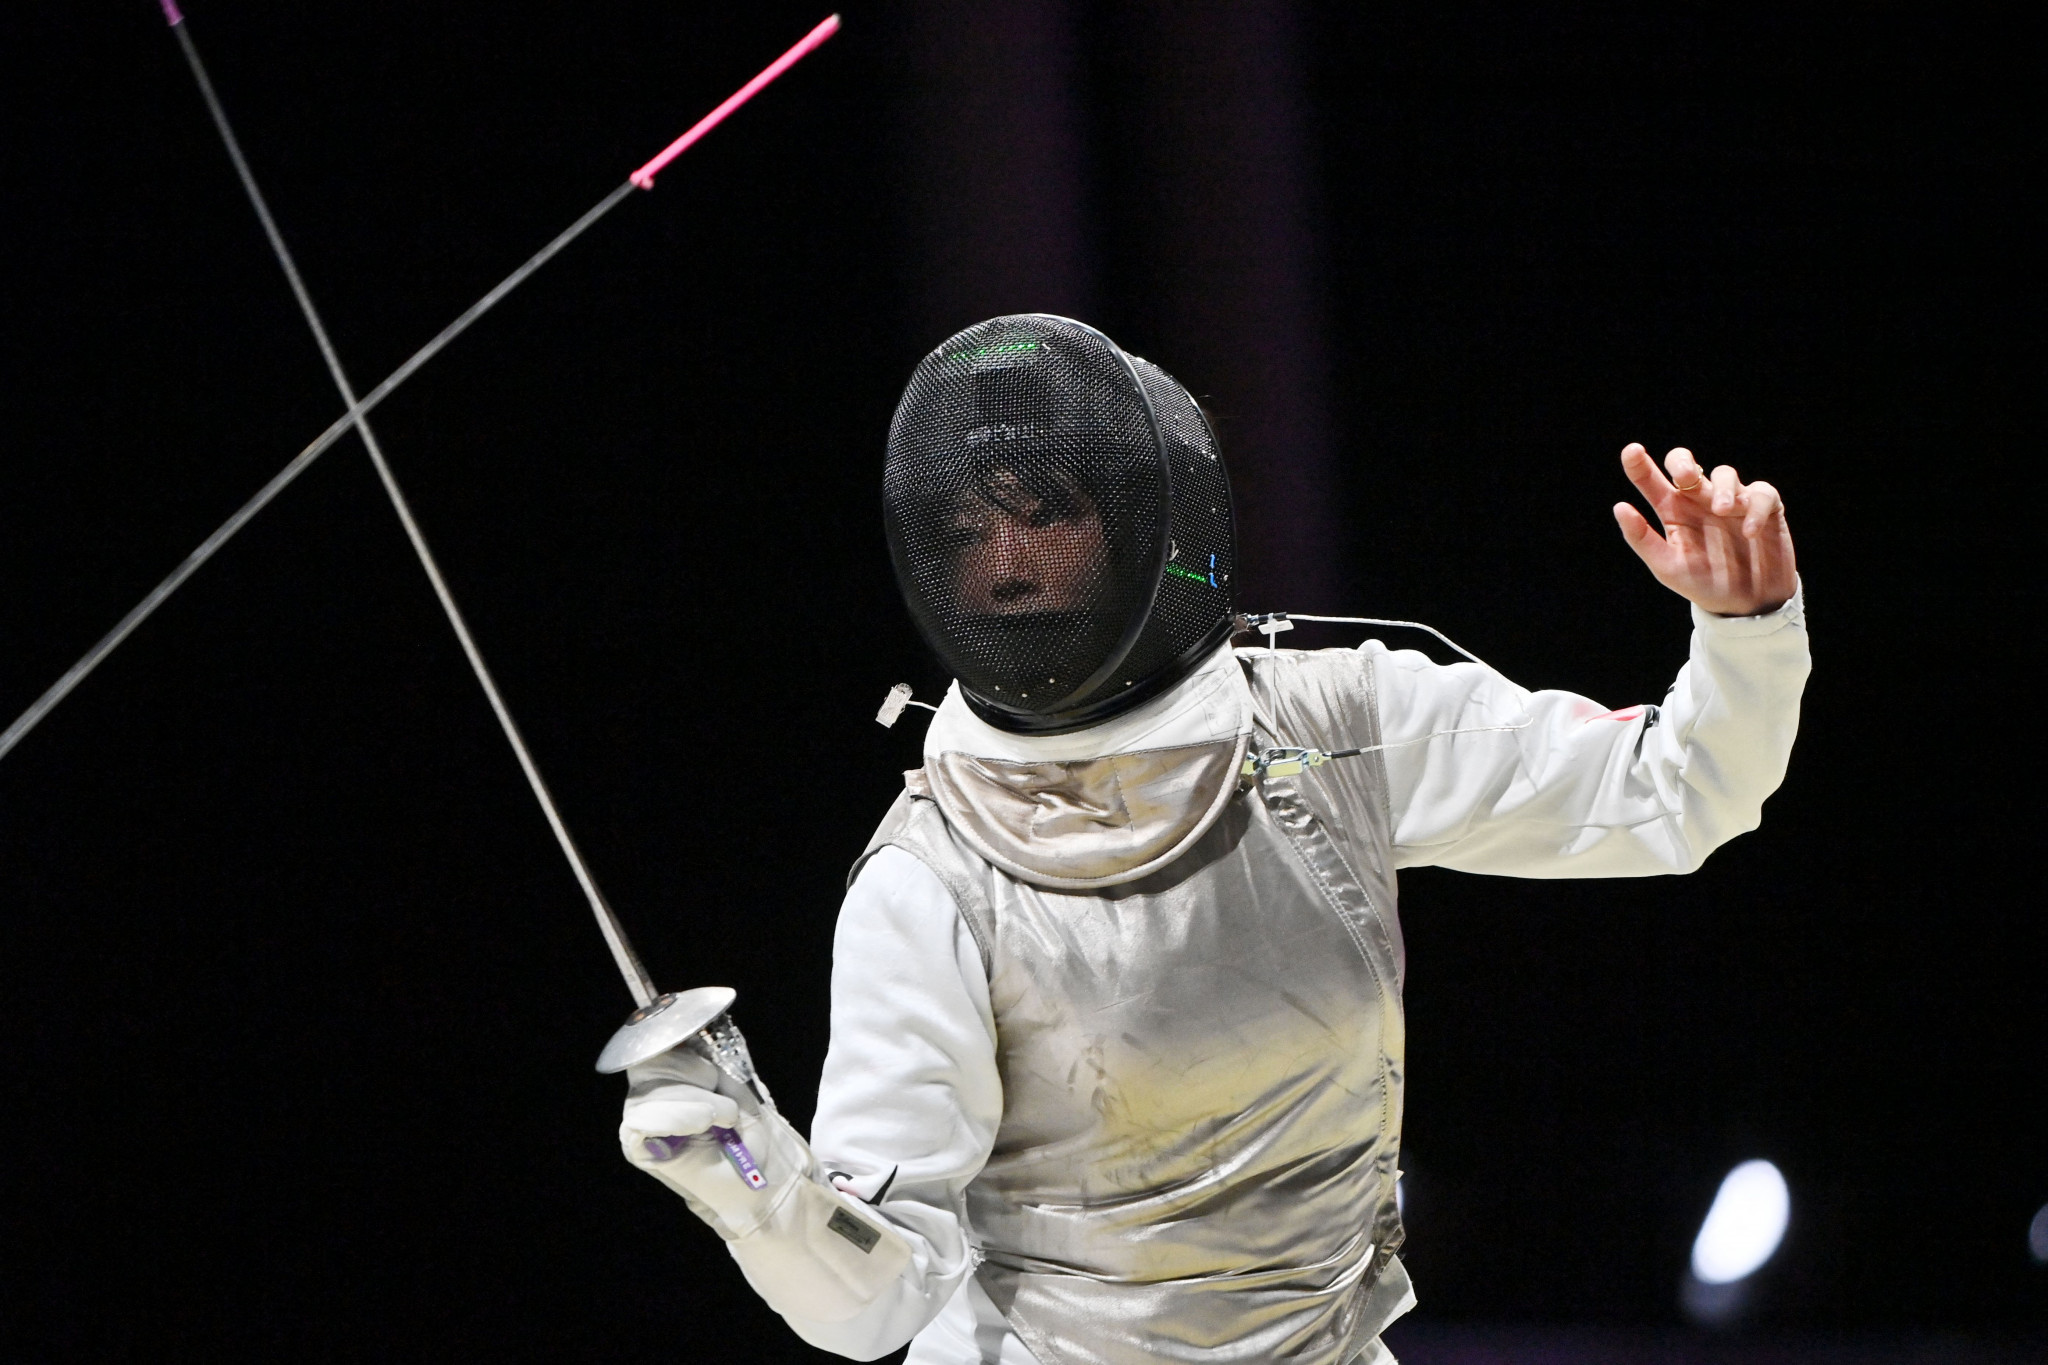 South Korea and Japan win team gold medals at Asian Fencing Championships